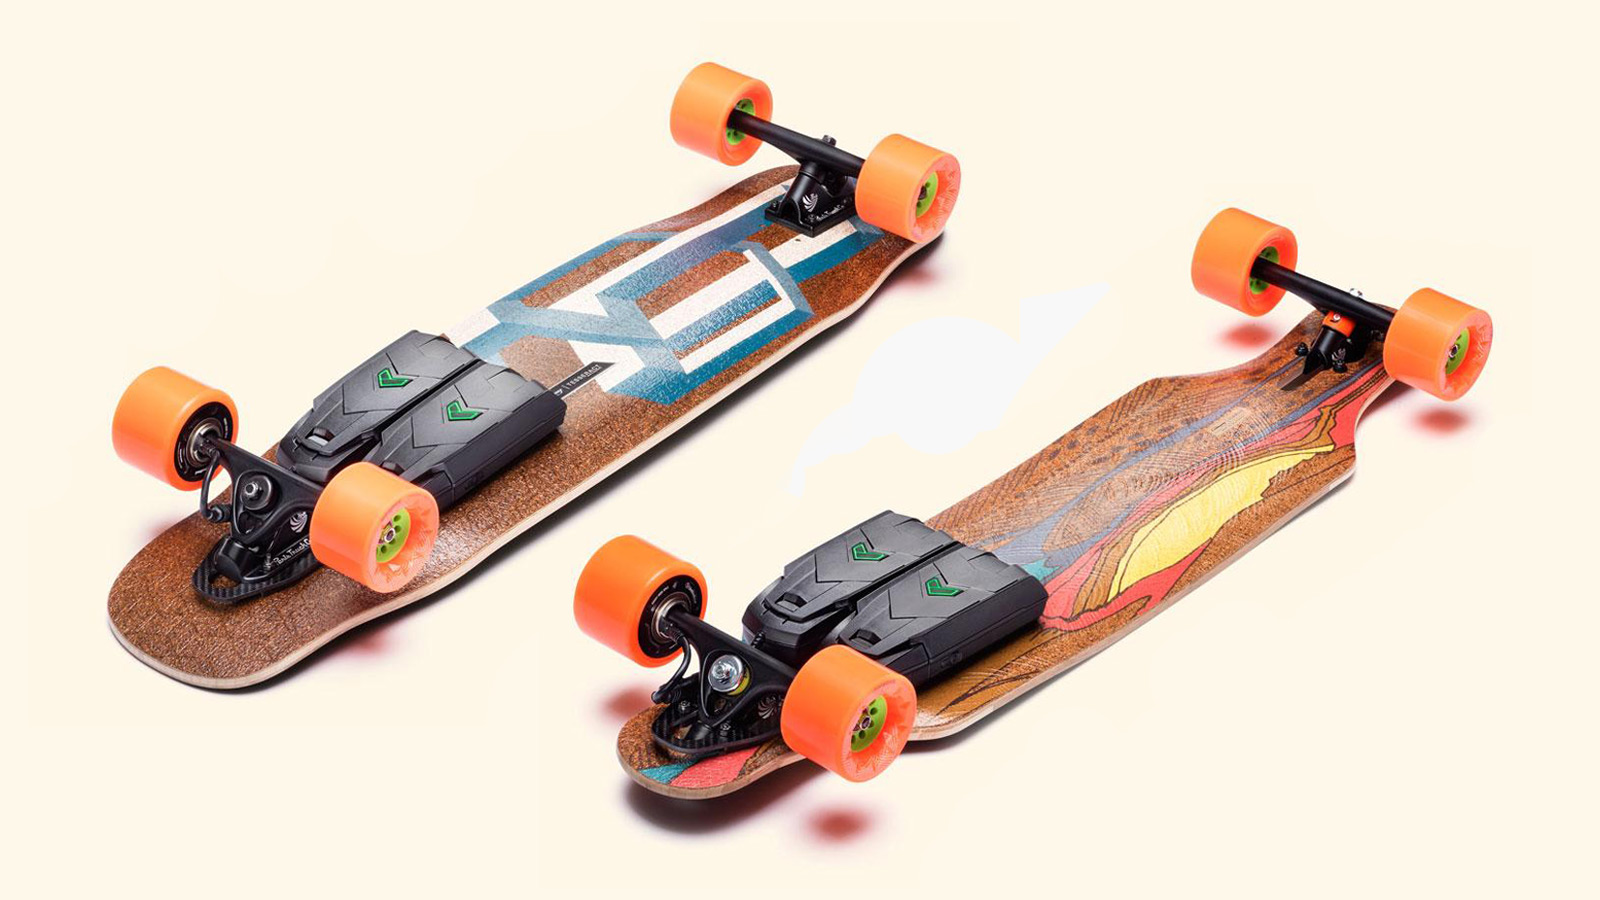 Unlimited x Loaded Cruiser Kit